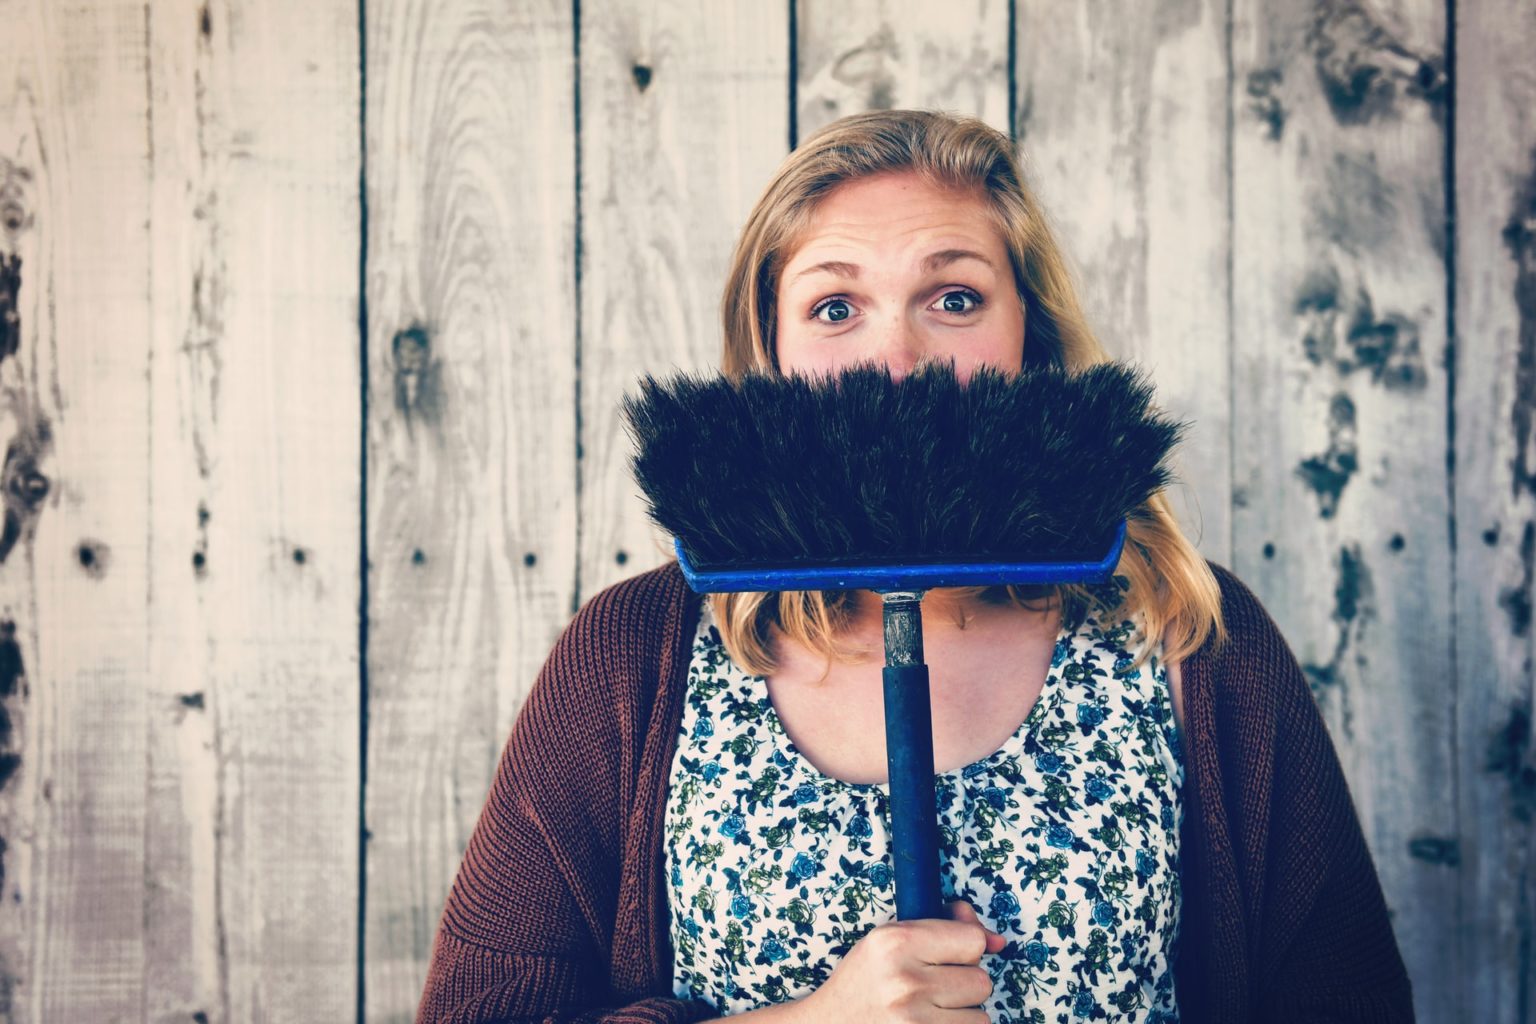 A young, blonde woman hides her smile behind a broom